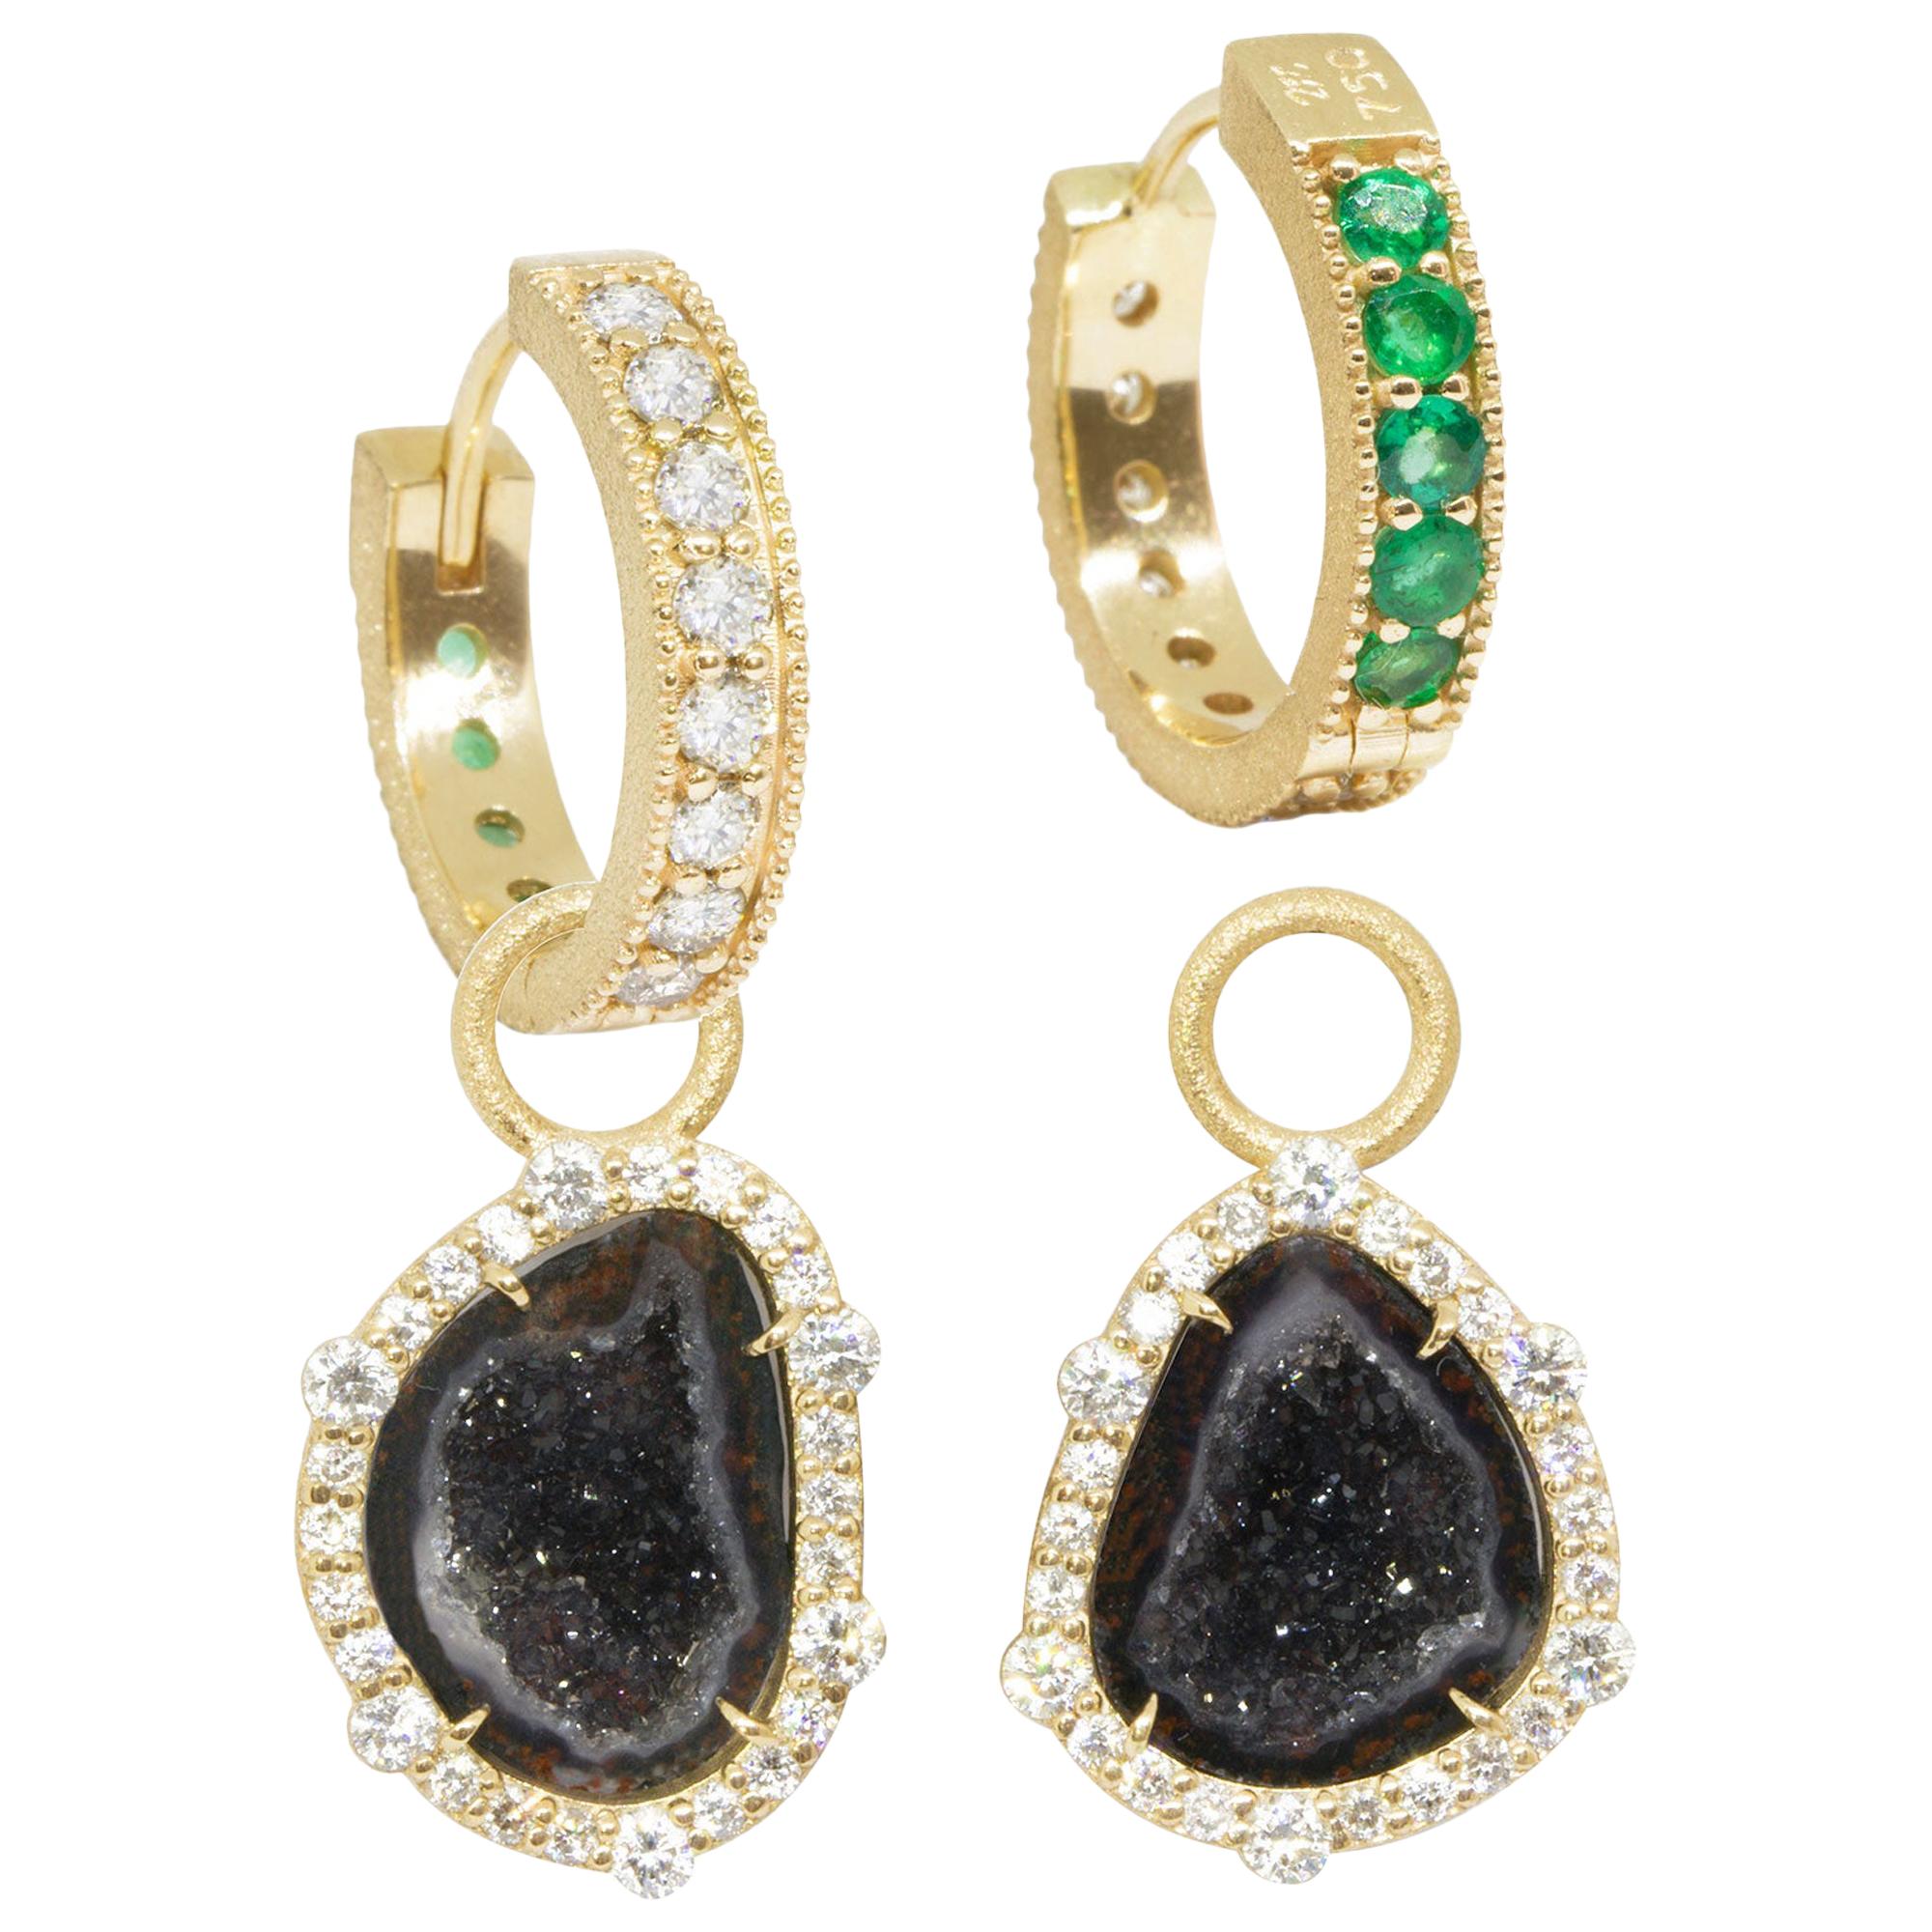 Geode Charms and Intricate 18 Karat Gold Reversible Huggies Earrings For Sale